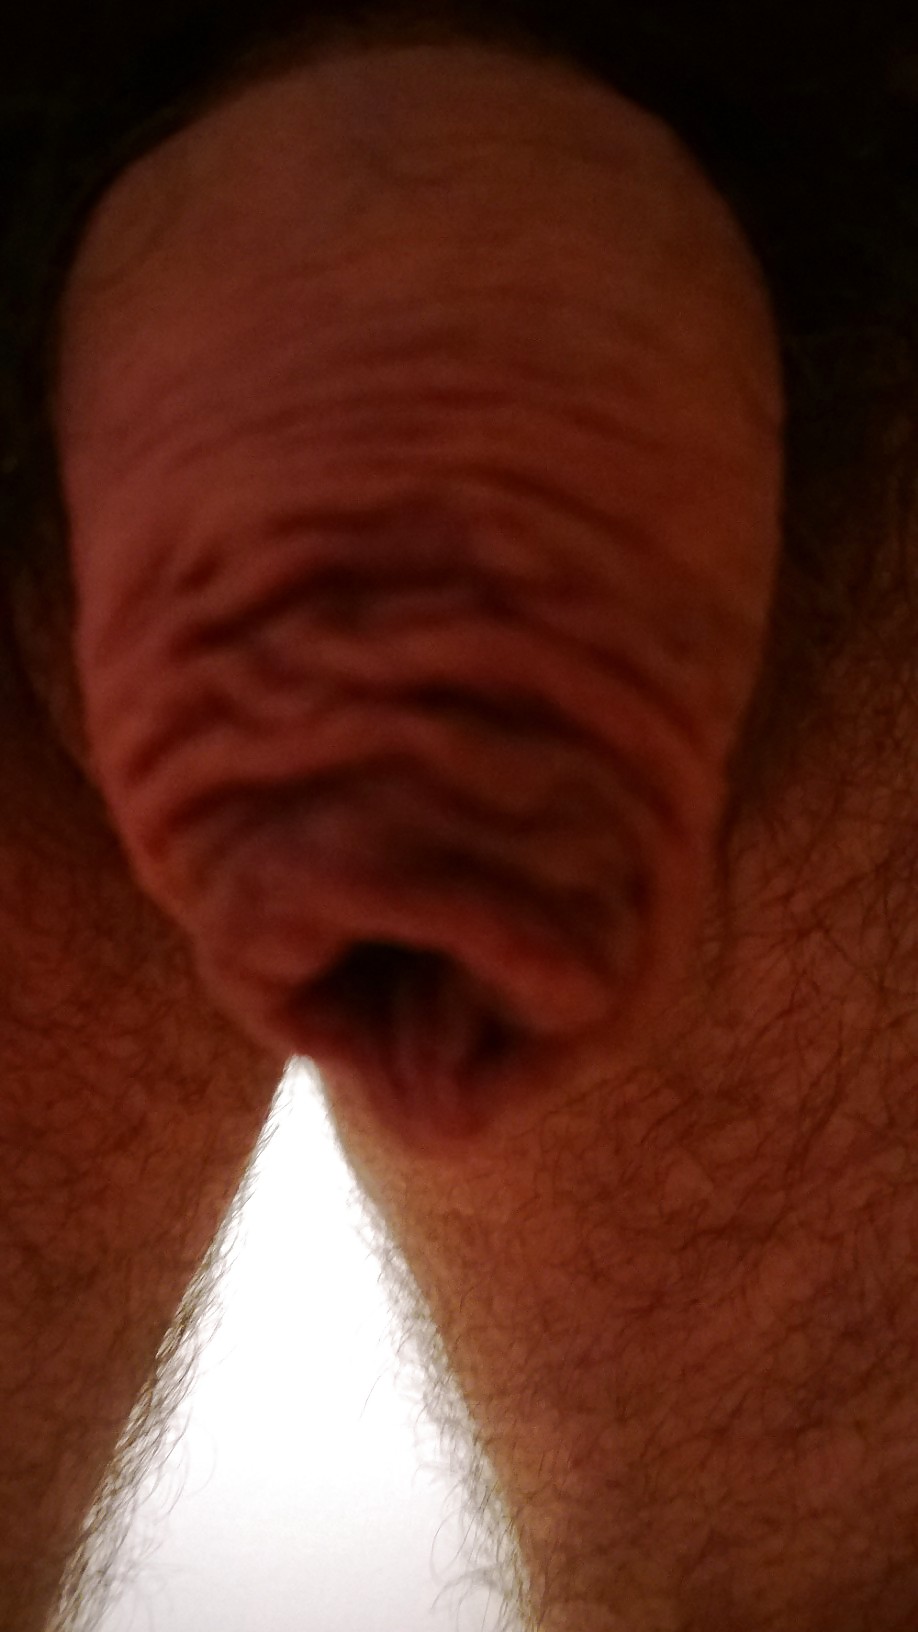 The cocksucker point of view (close up pics) porn gallery